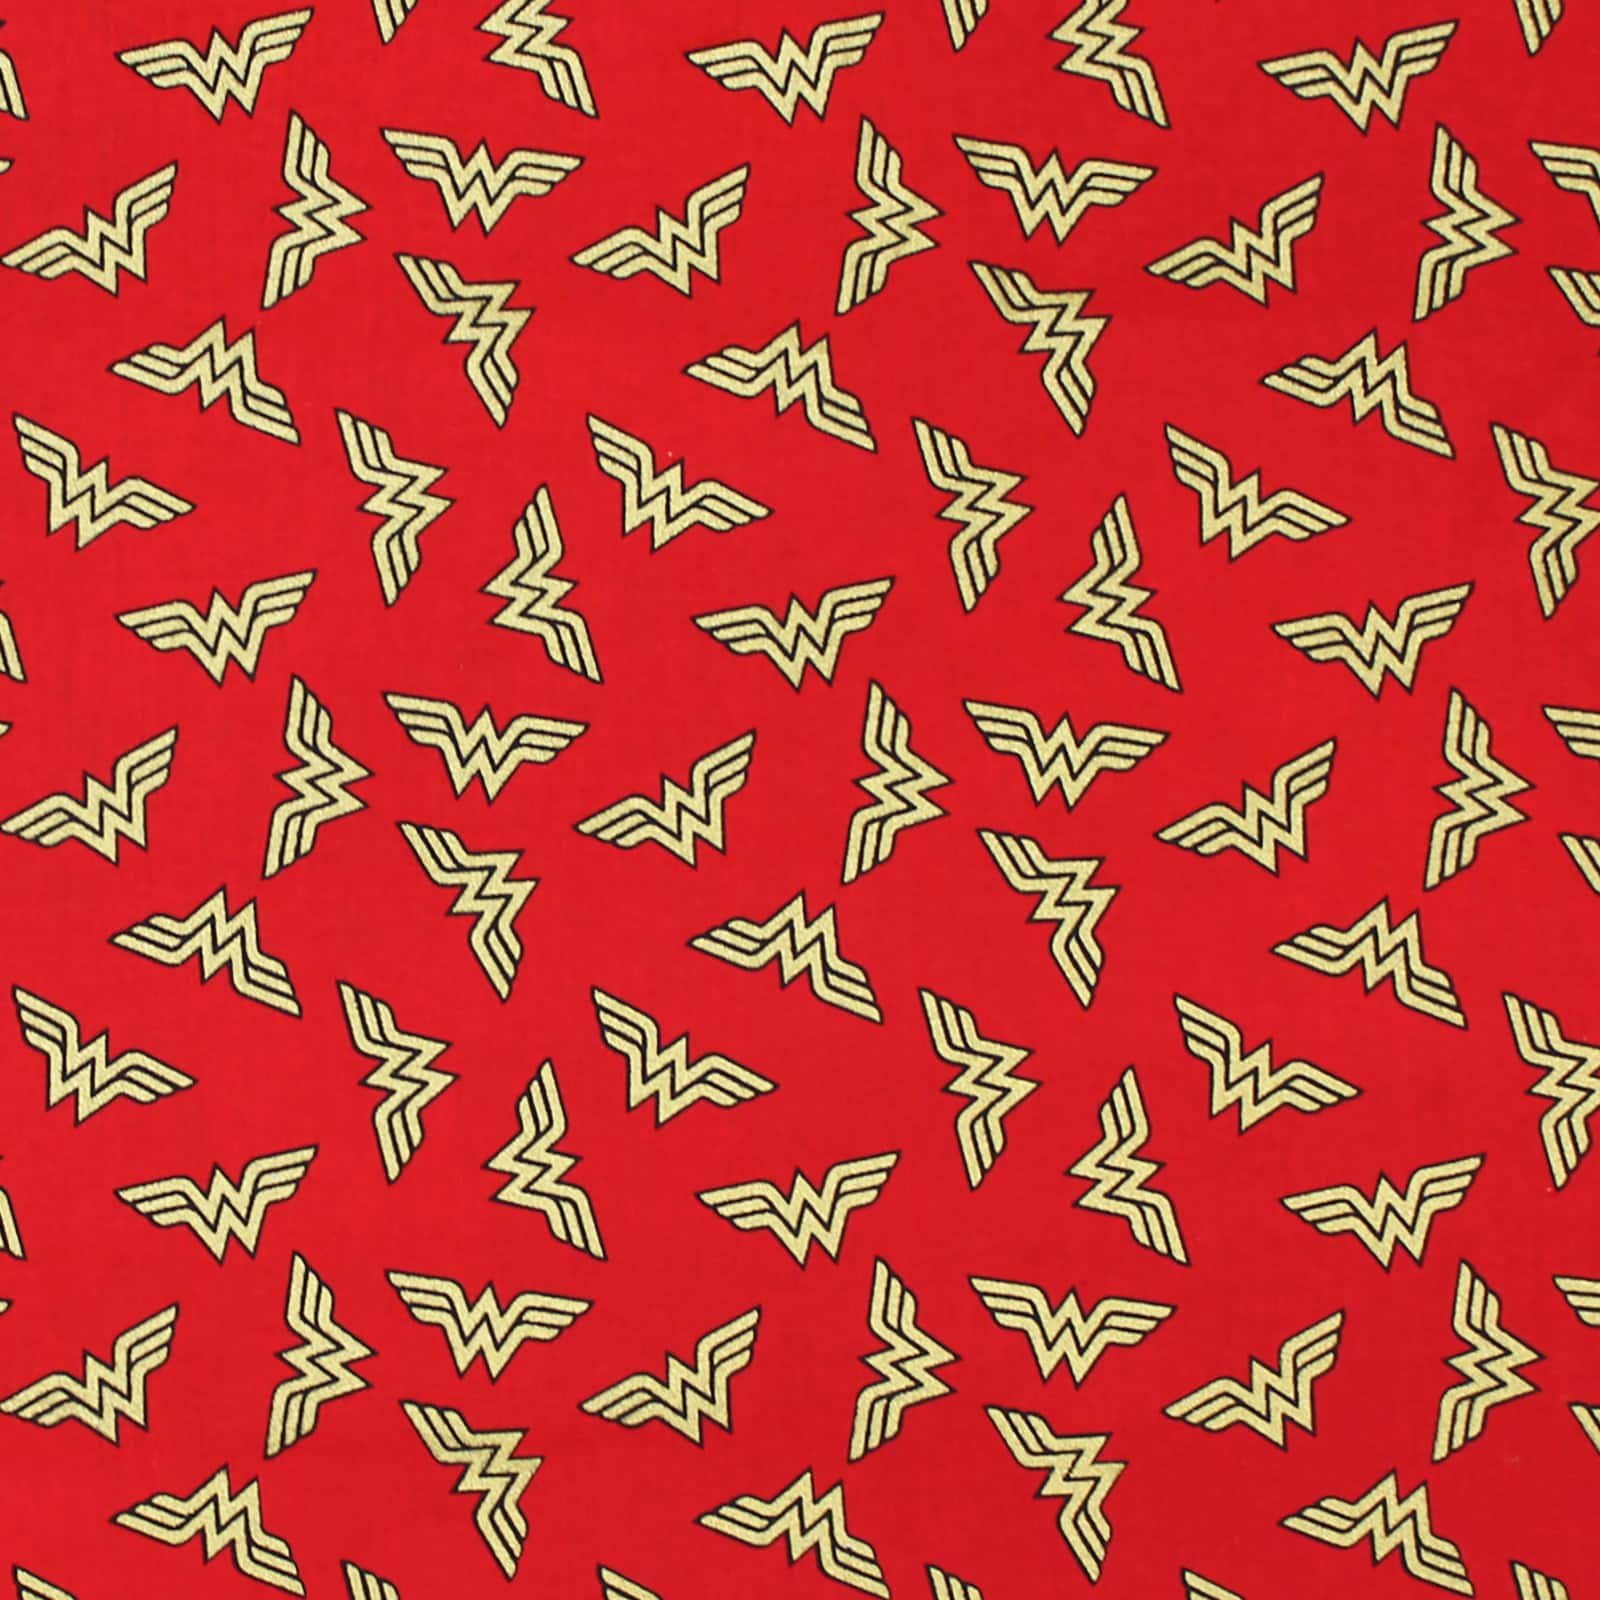 FREE SHIPPING 7 Yards Wonder Woman Logo Patriotic 100% Cotton Fabric by Camelot Fabrics